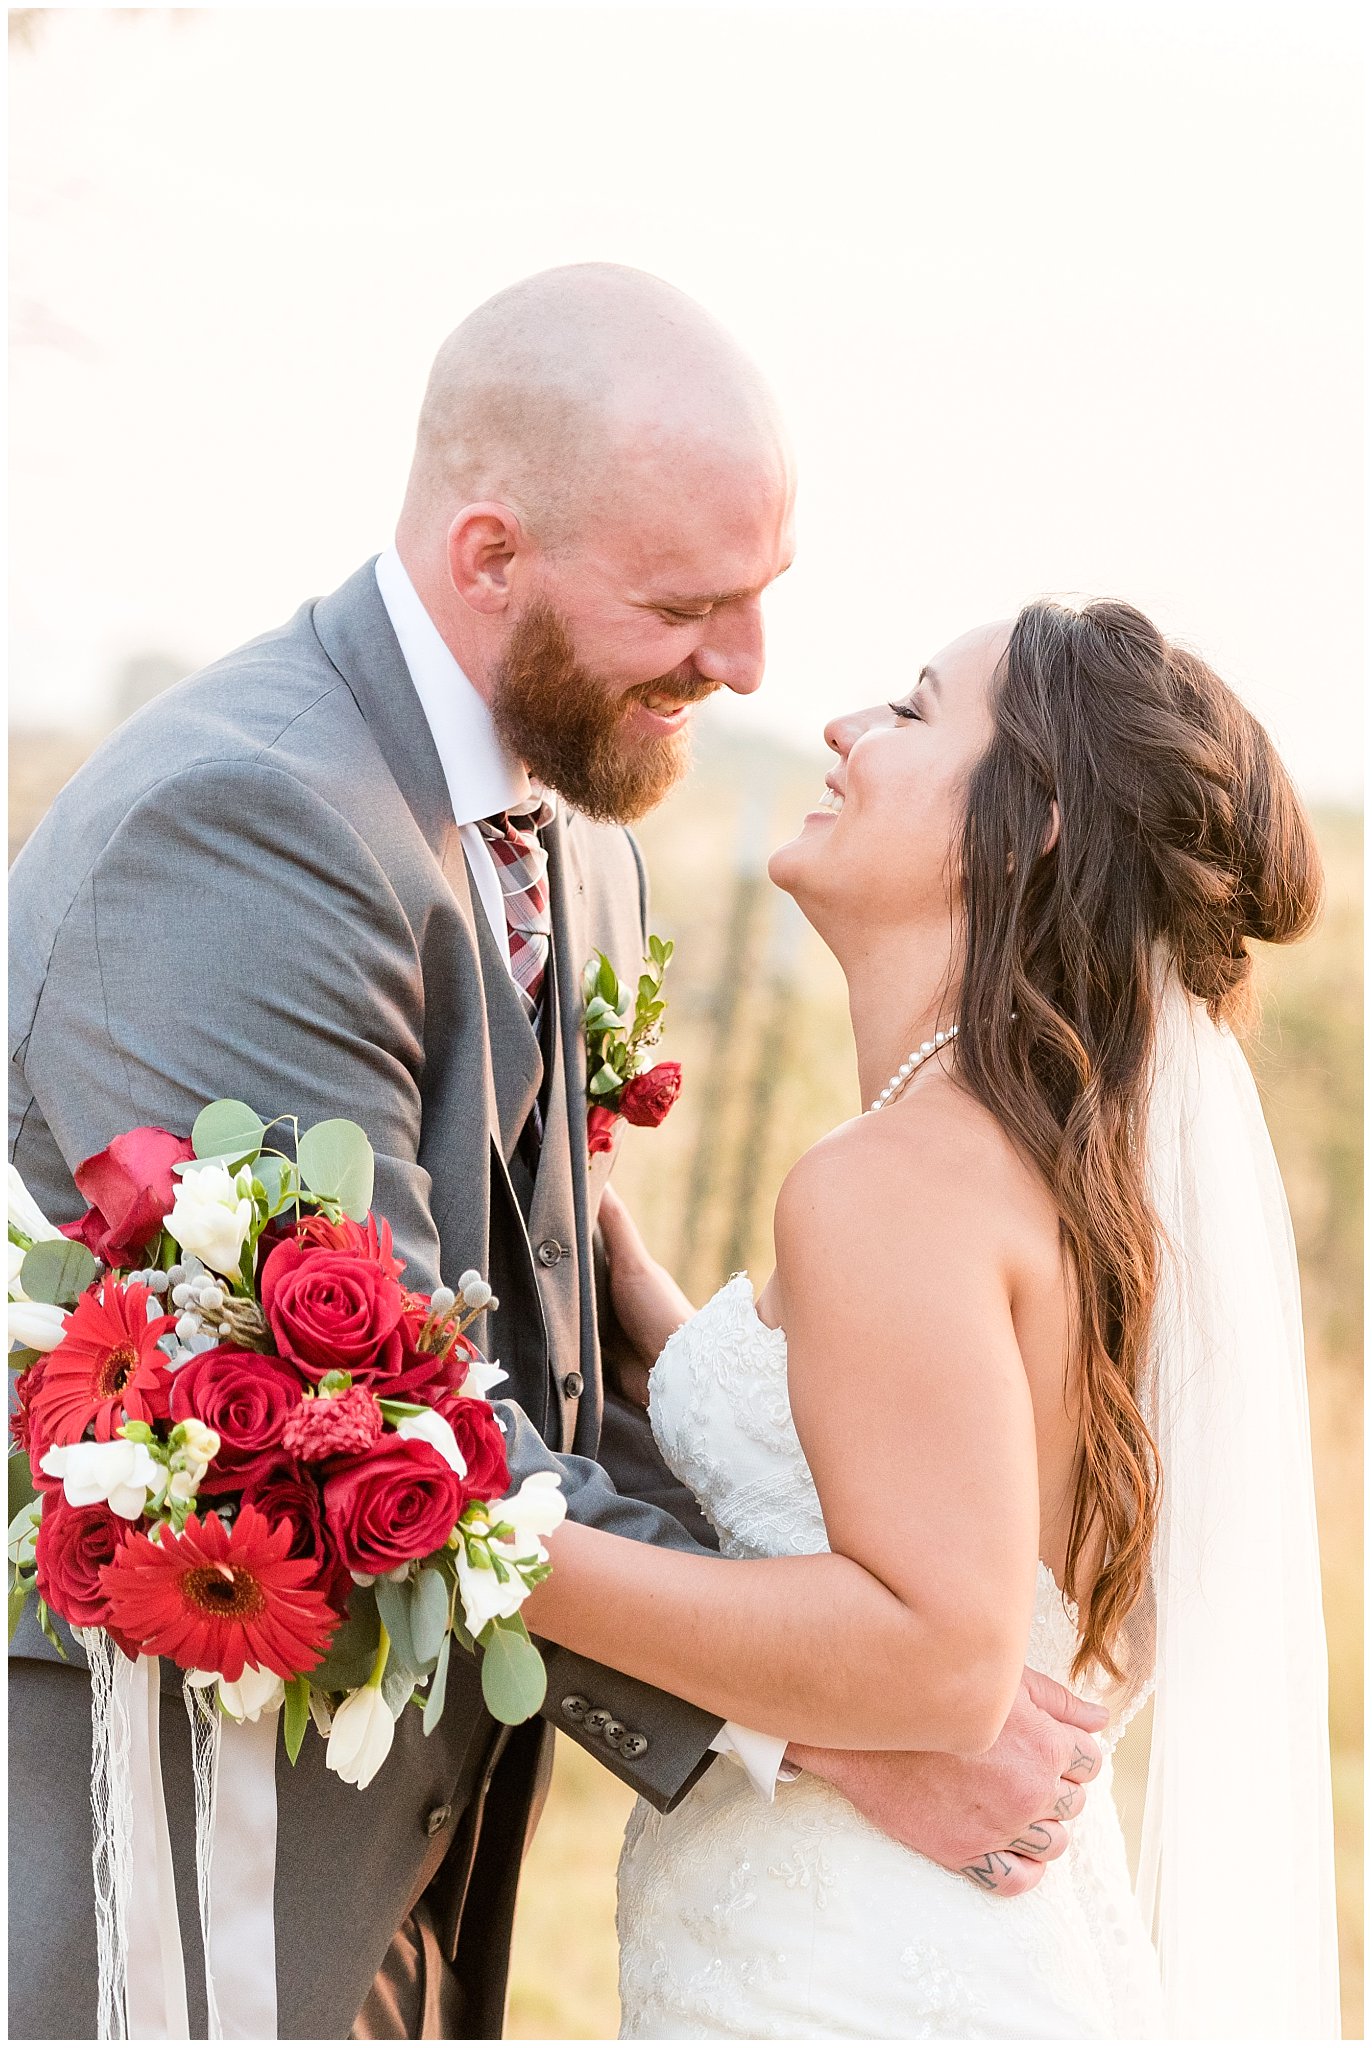 Davis County Utah Wedding | Bride and groom laughing | Jessie and Dallin Photography